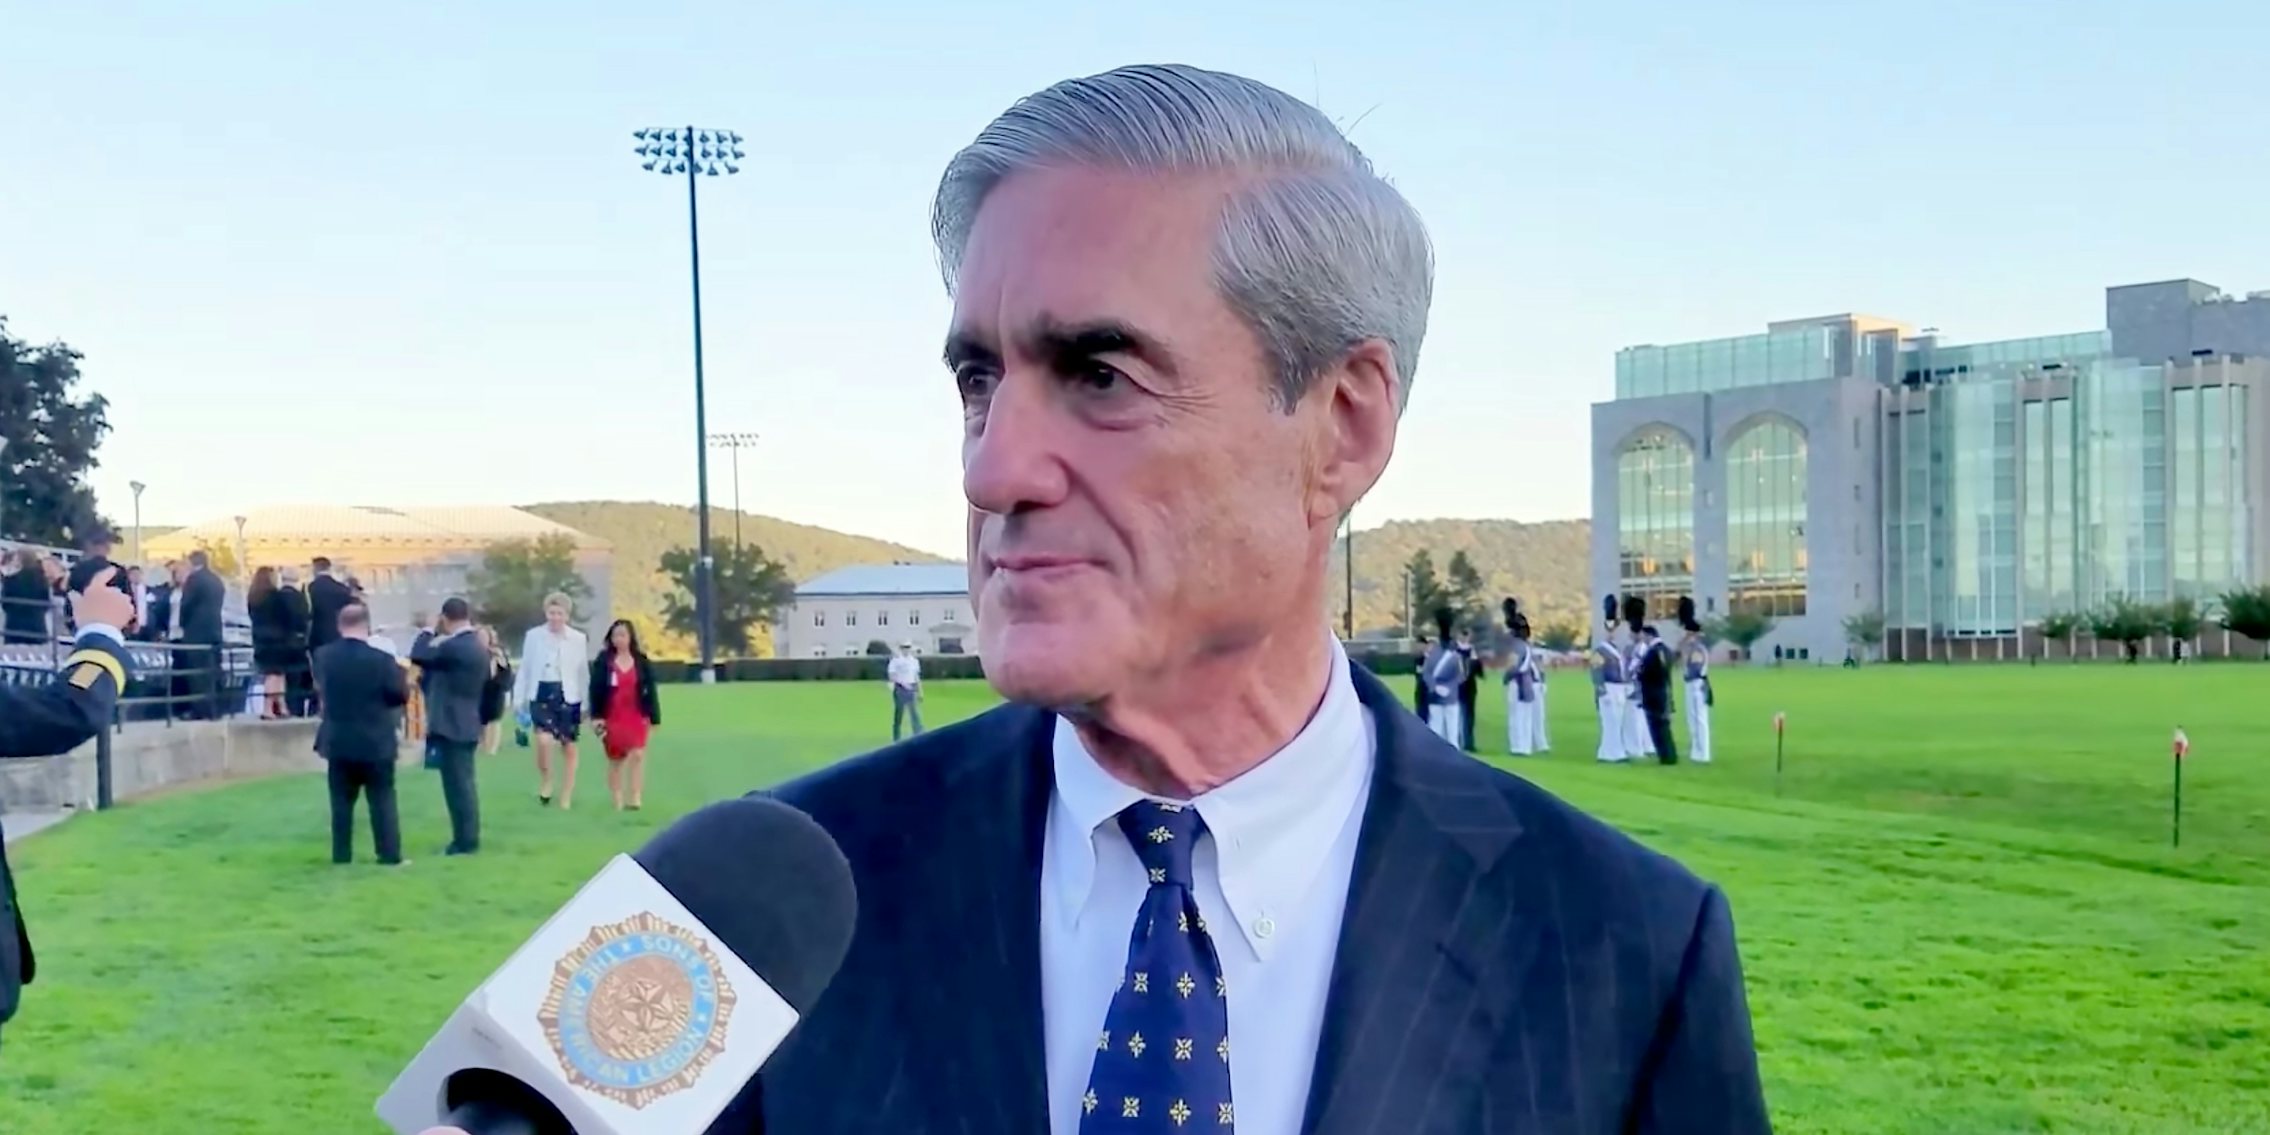 The Mueller Report is expected to be released later this week.